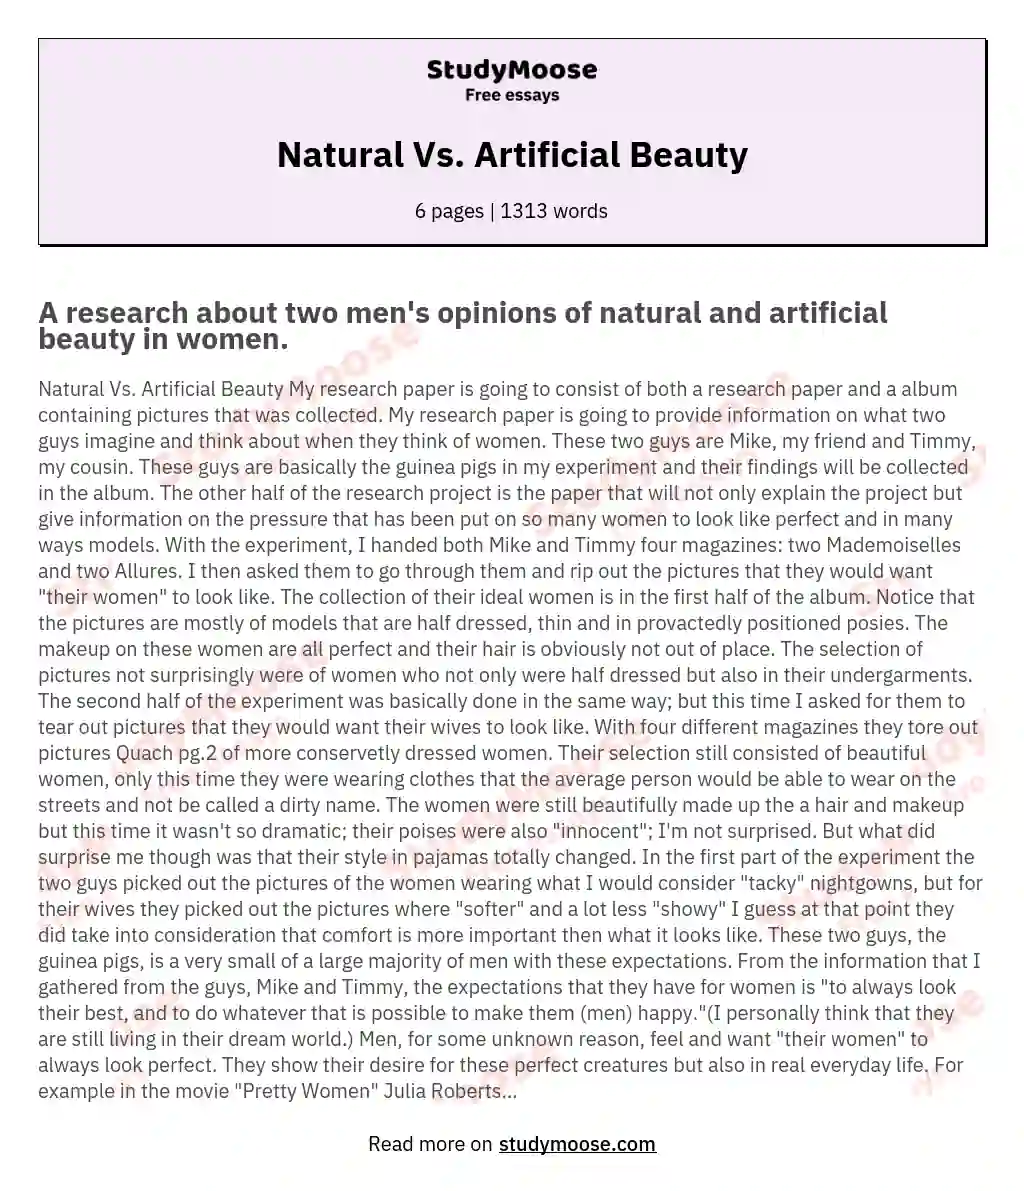 Natural Vs Artificial Beauty Free